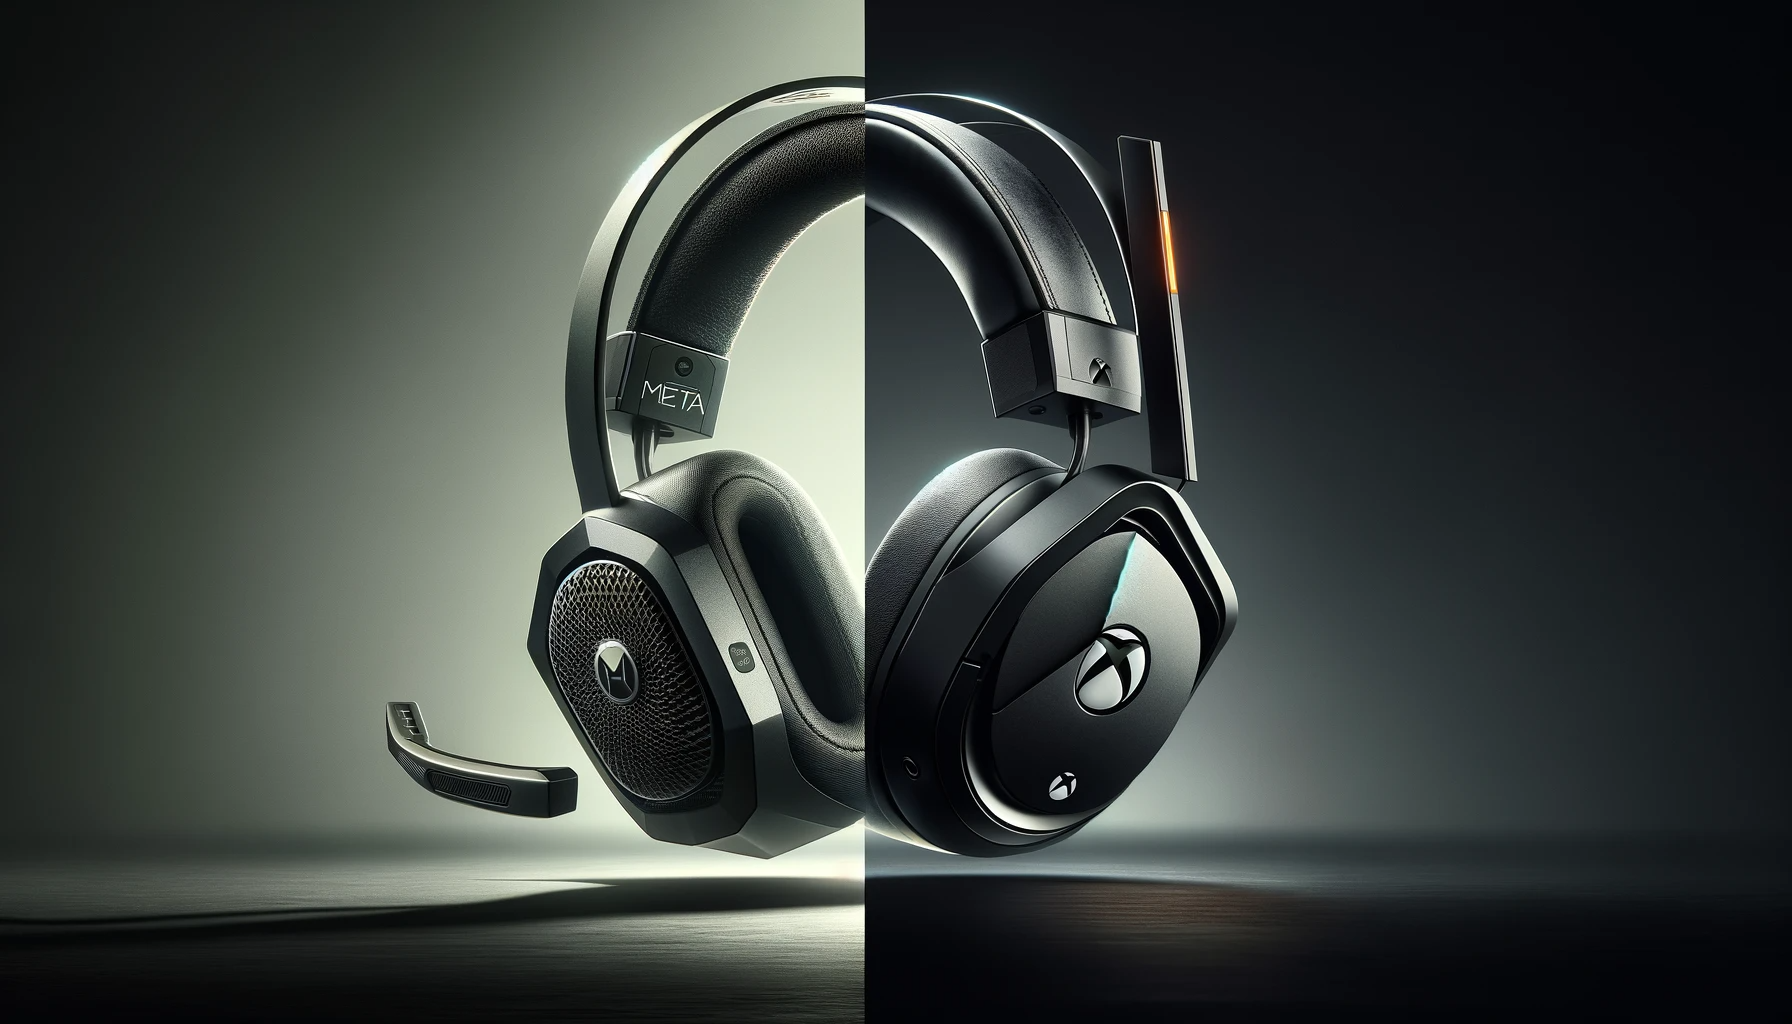 Split-screen image with Meta Quest 2 headset on the left and Xbox Wireless Headset on the right. The Meta Quest 2 showcases its sleek, modern design, while the Xbox headset displays its unique gaming-focused aesthetic, both with prominent branding and comfortable ear cups.